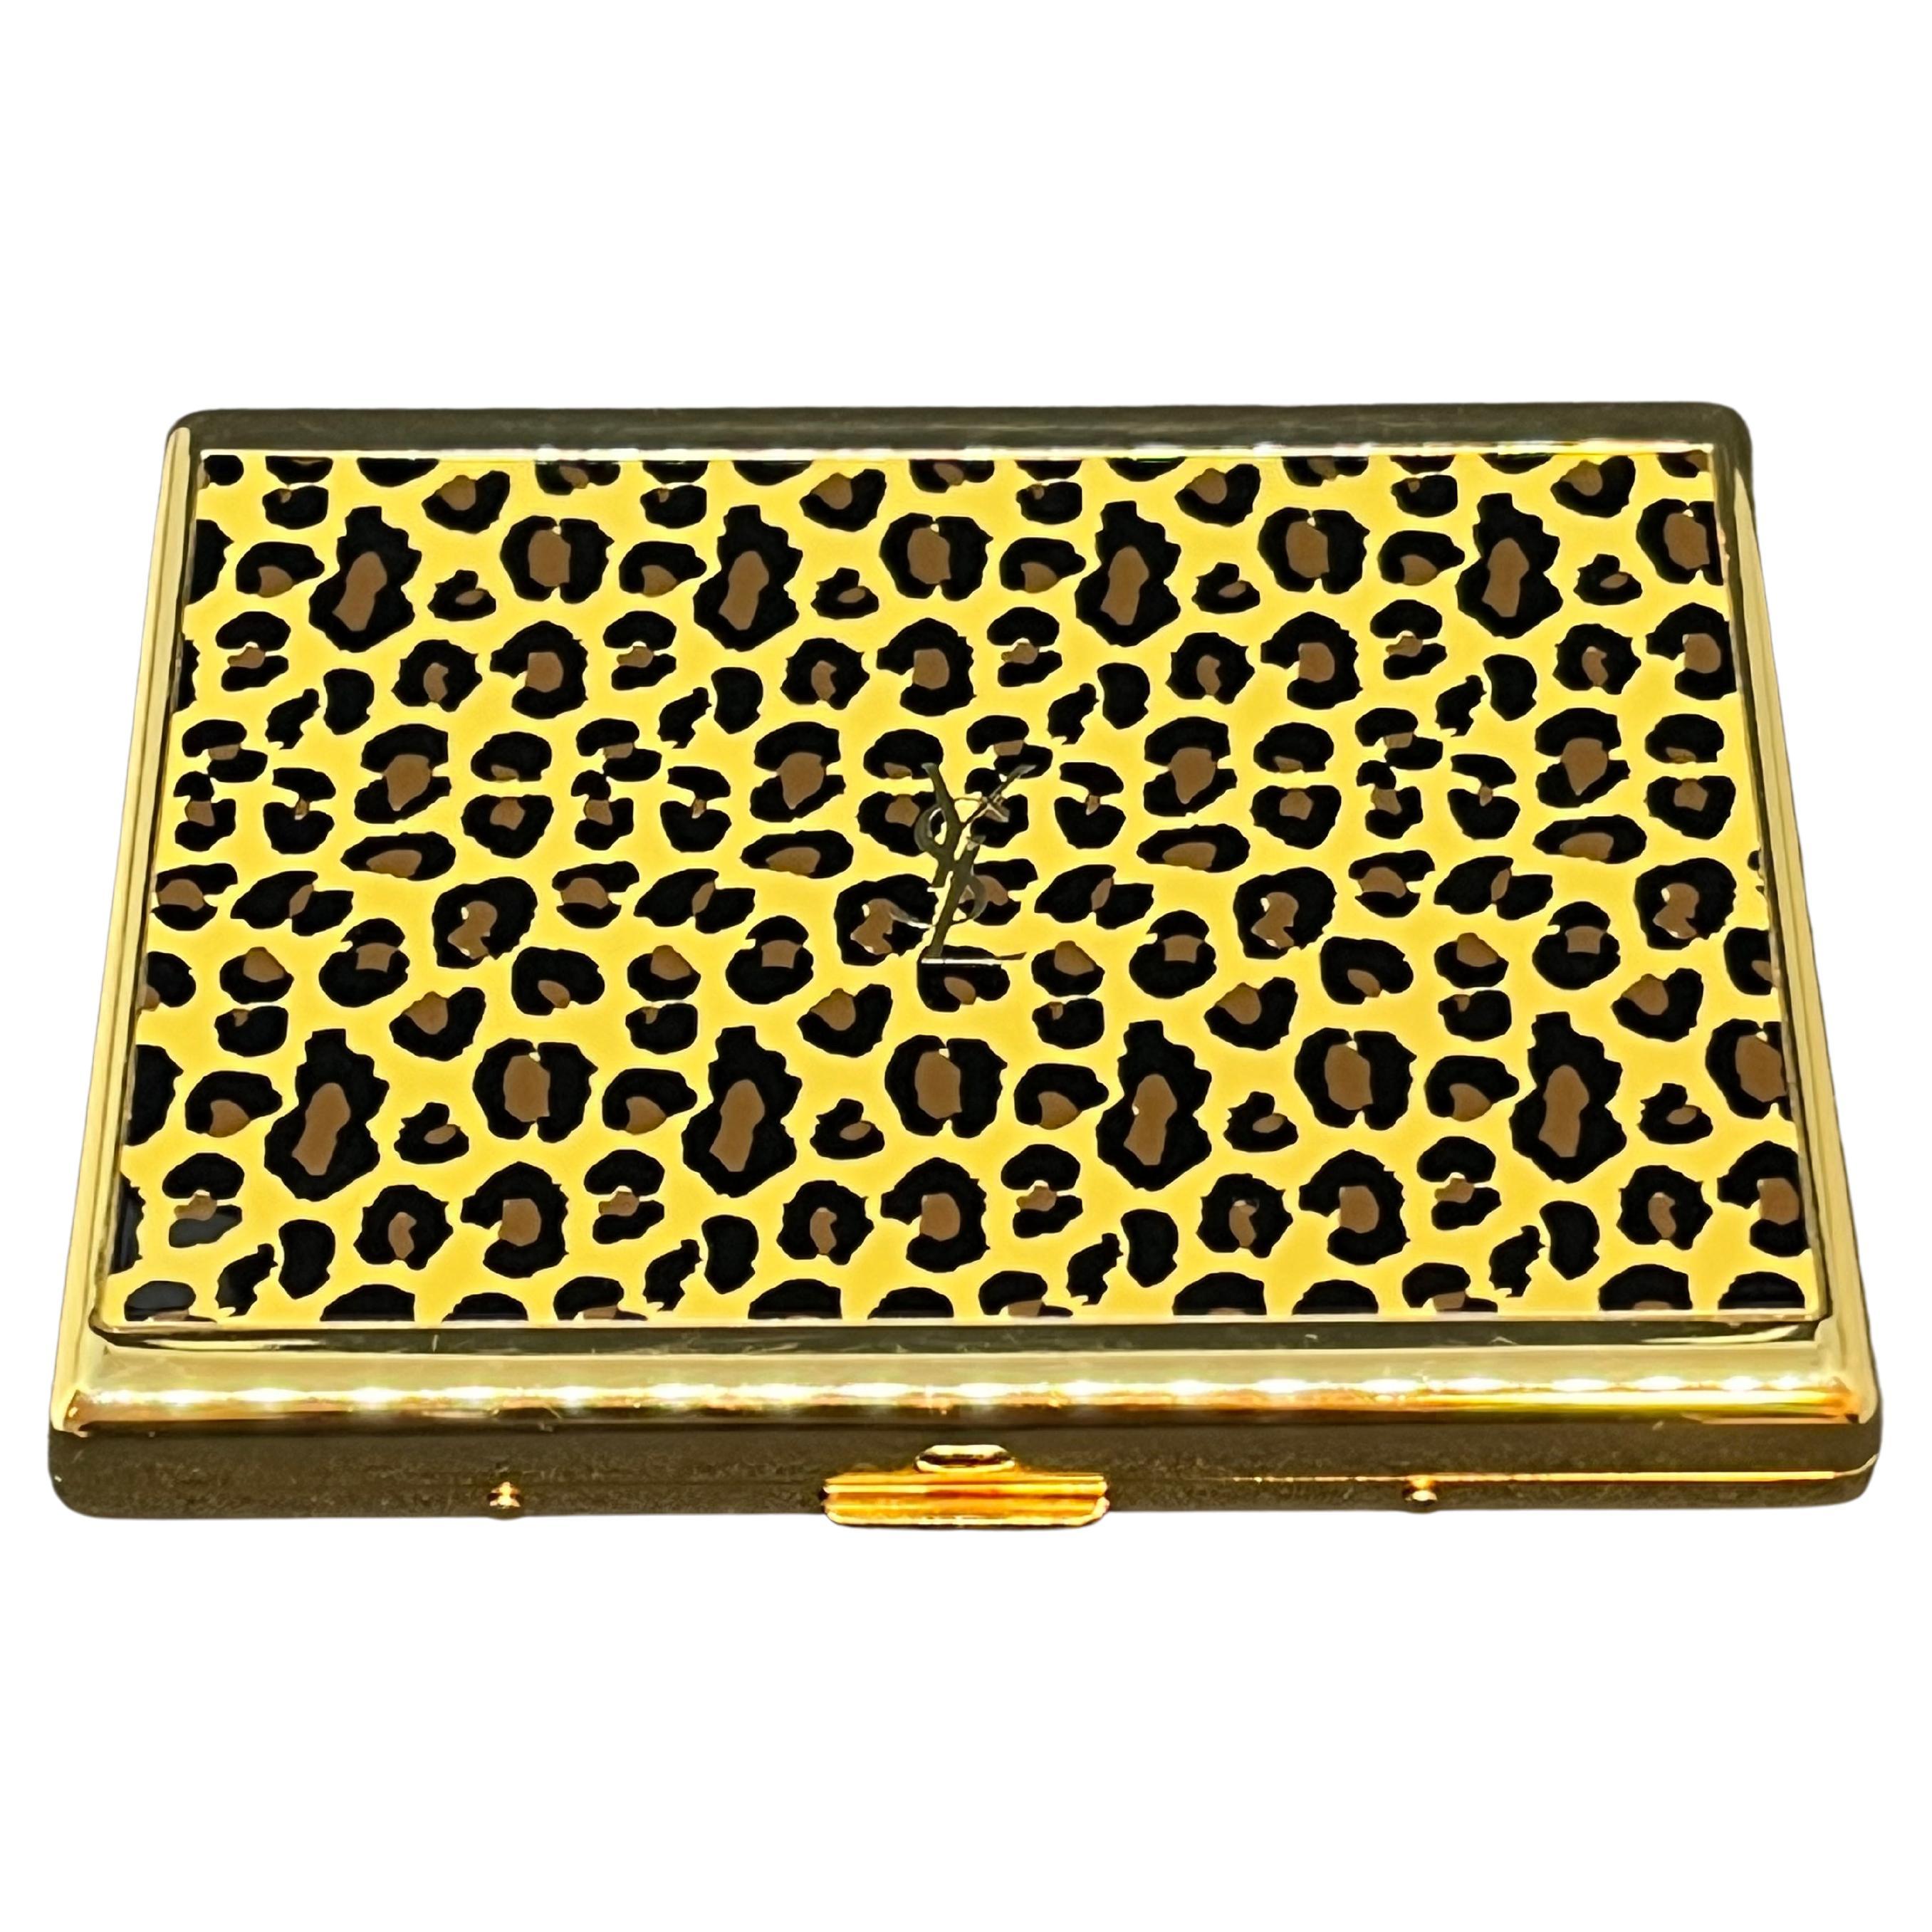 “YSL” Yves Saint Laurent Gold Plated Retro Cigarette Case
Logo Cigarette Case “Jungle” print 
The case is in mint condition. 
The clasp snaps as new. 
Retro. 
1970s
Gold plated. 
Signed YSL.
Very elegant and perfect for a unique classic gift. 